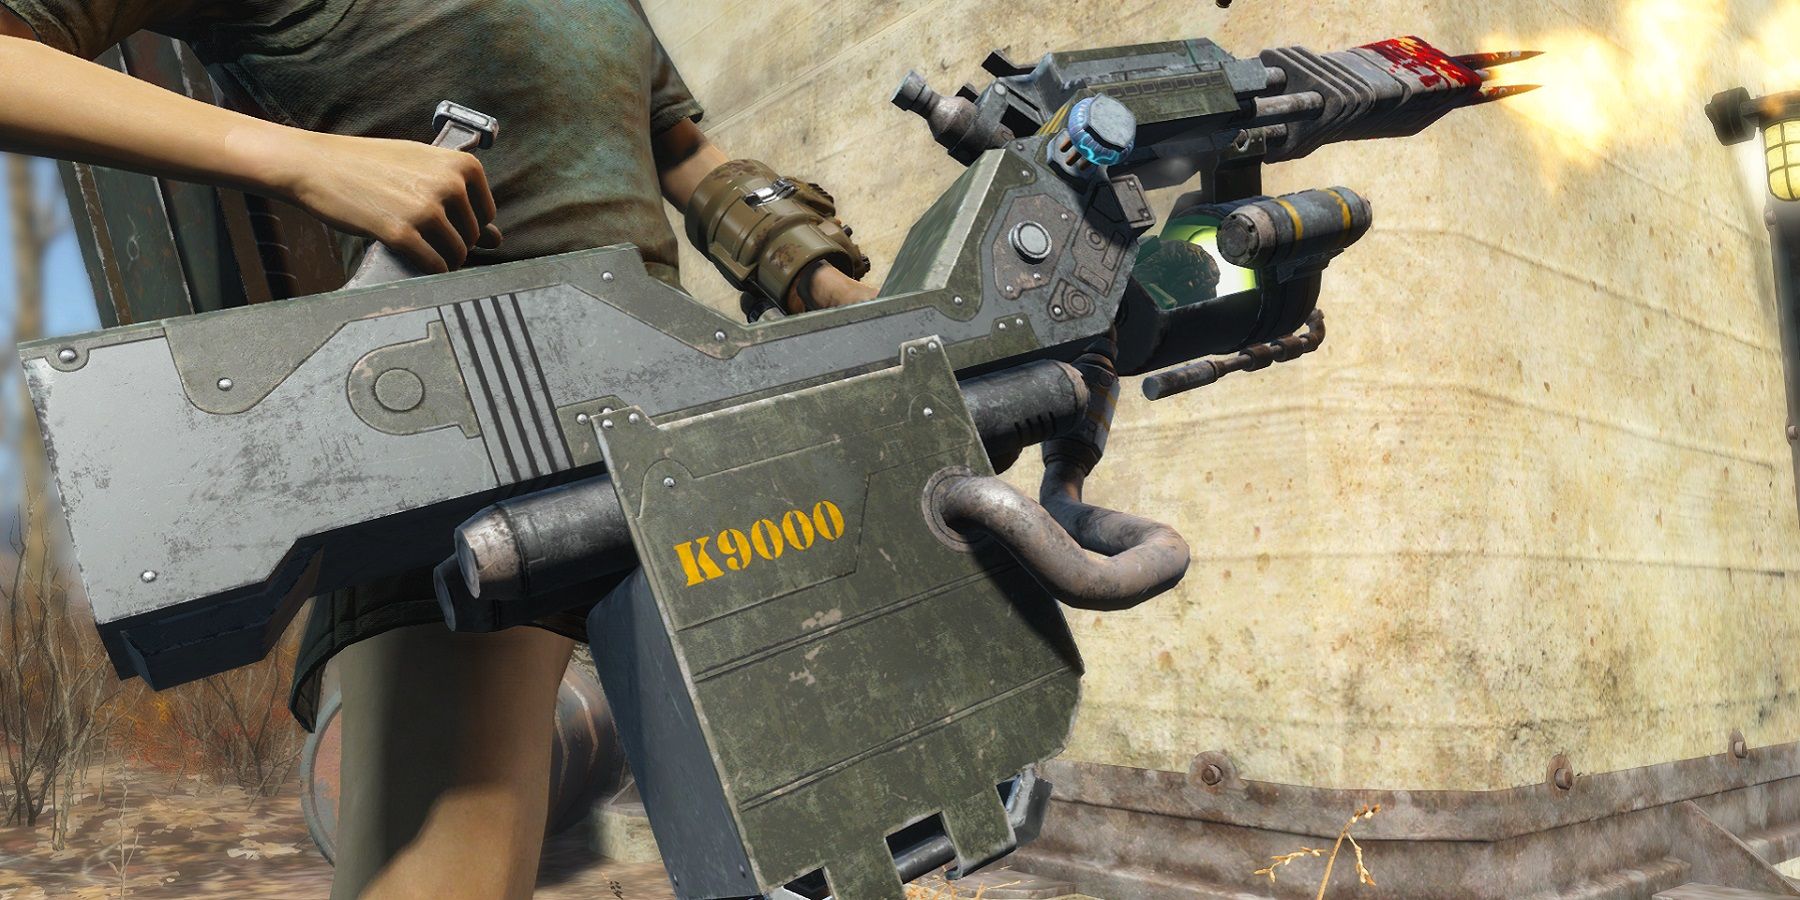 Image from a Fallout 4 mod showing someone firing the K9000 gun.